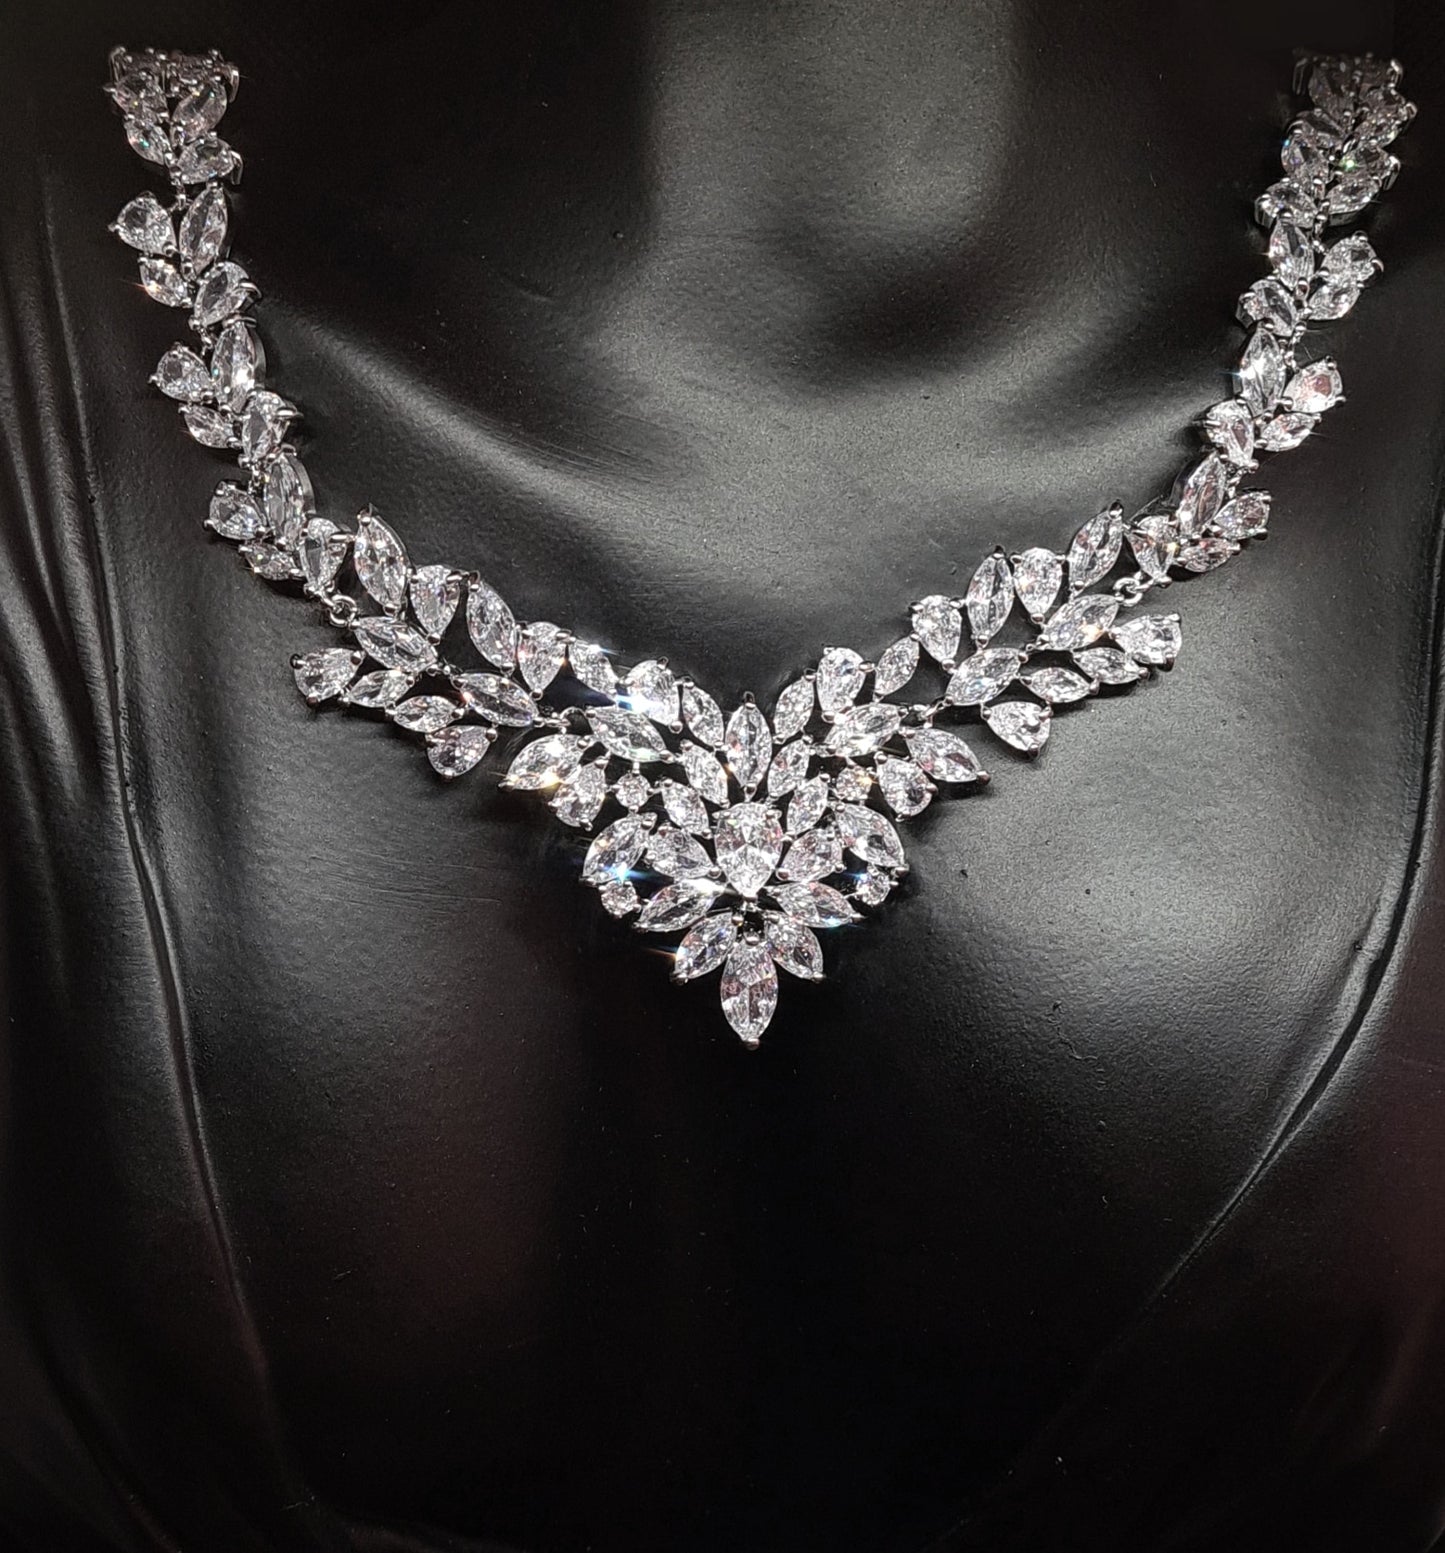 Anne Marie necklace with intricate floral design and sparkling cubic zirconia stones.